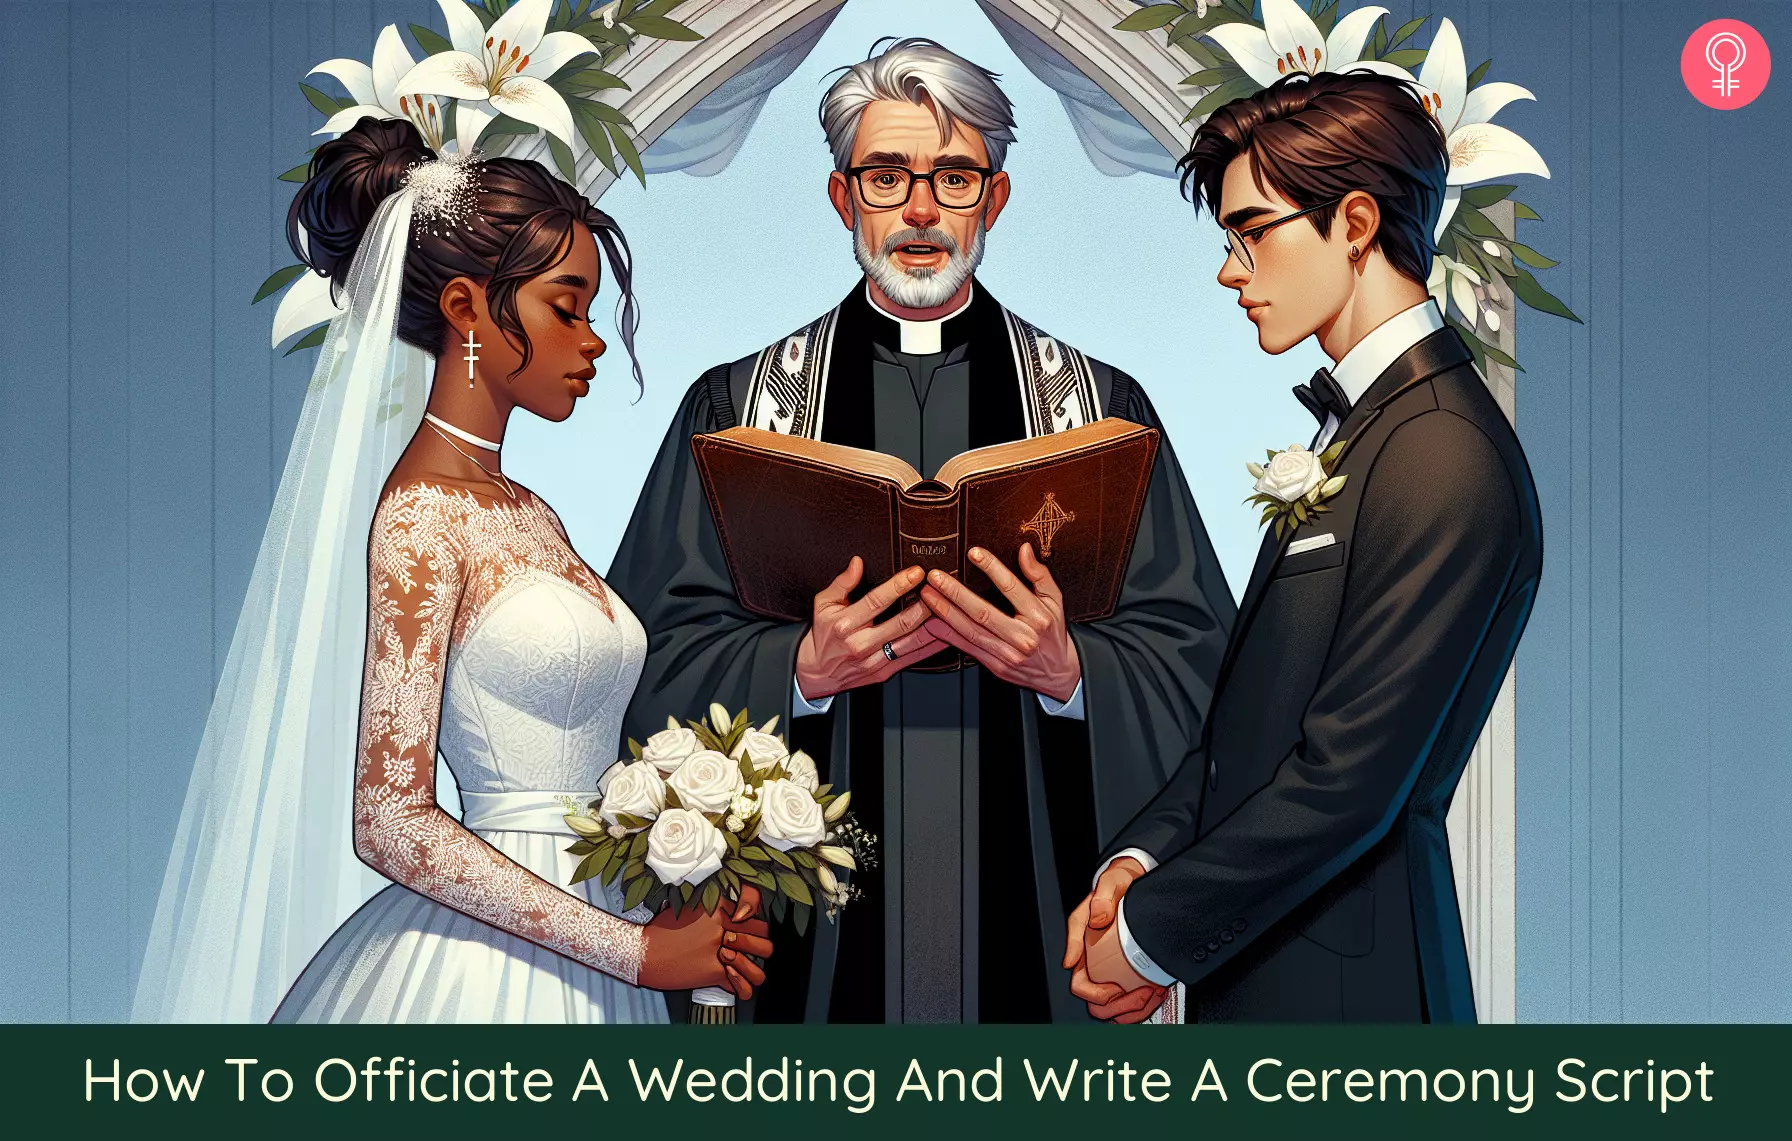 How To Officiate A Wedding